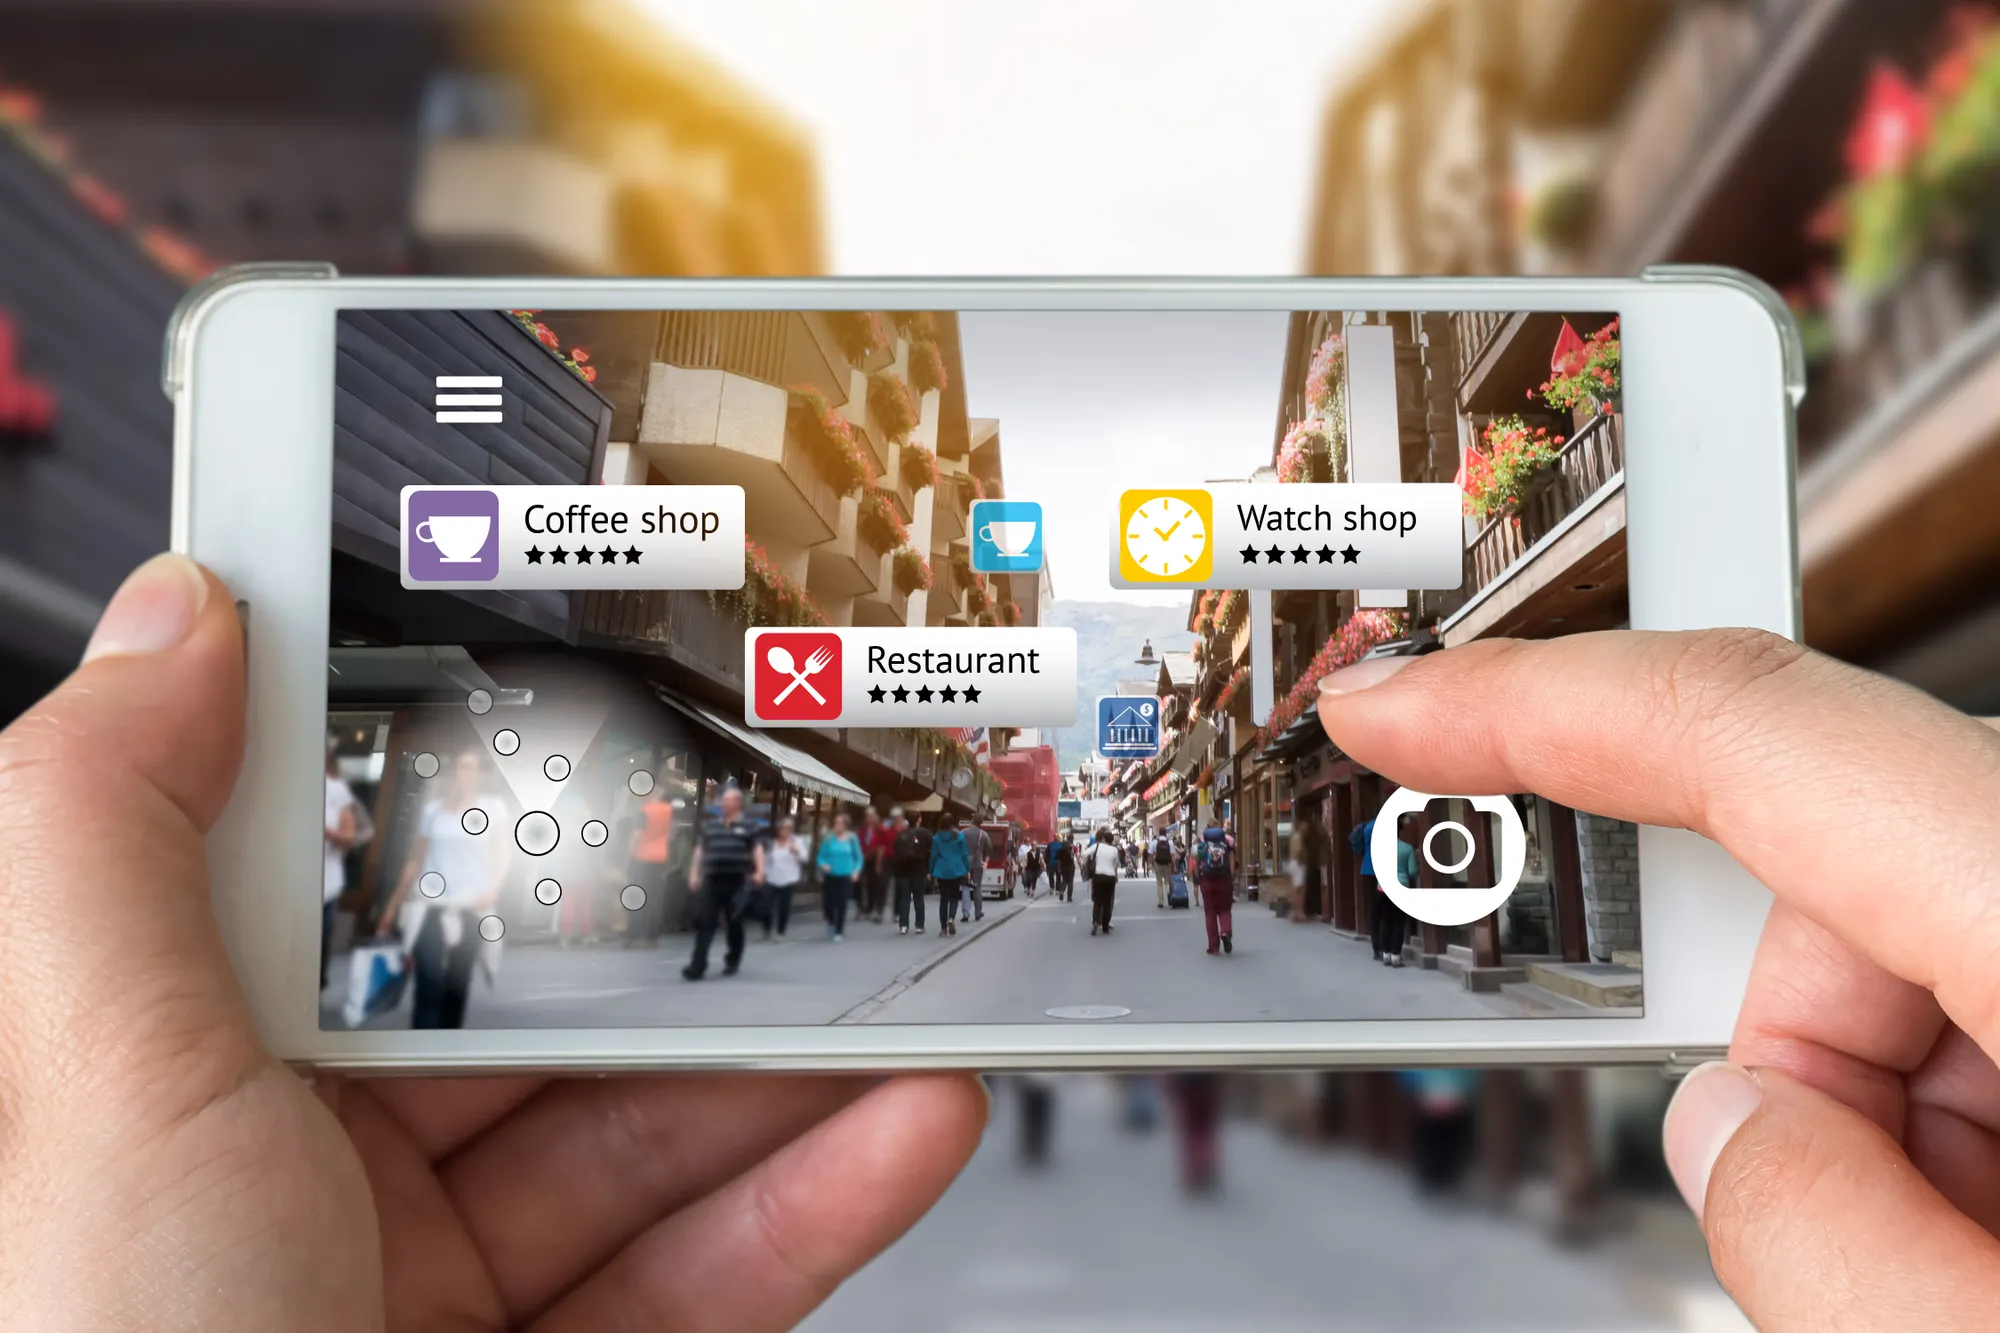 Augmented reality marketing concept. Hand holding smart phone use AR application to check relevant information about the spaces around customer.